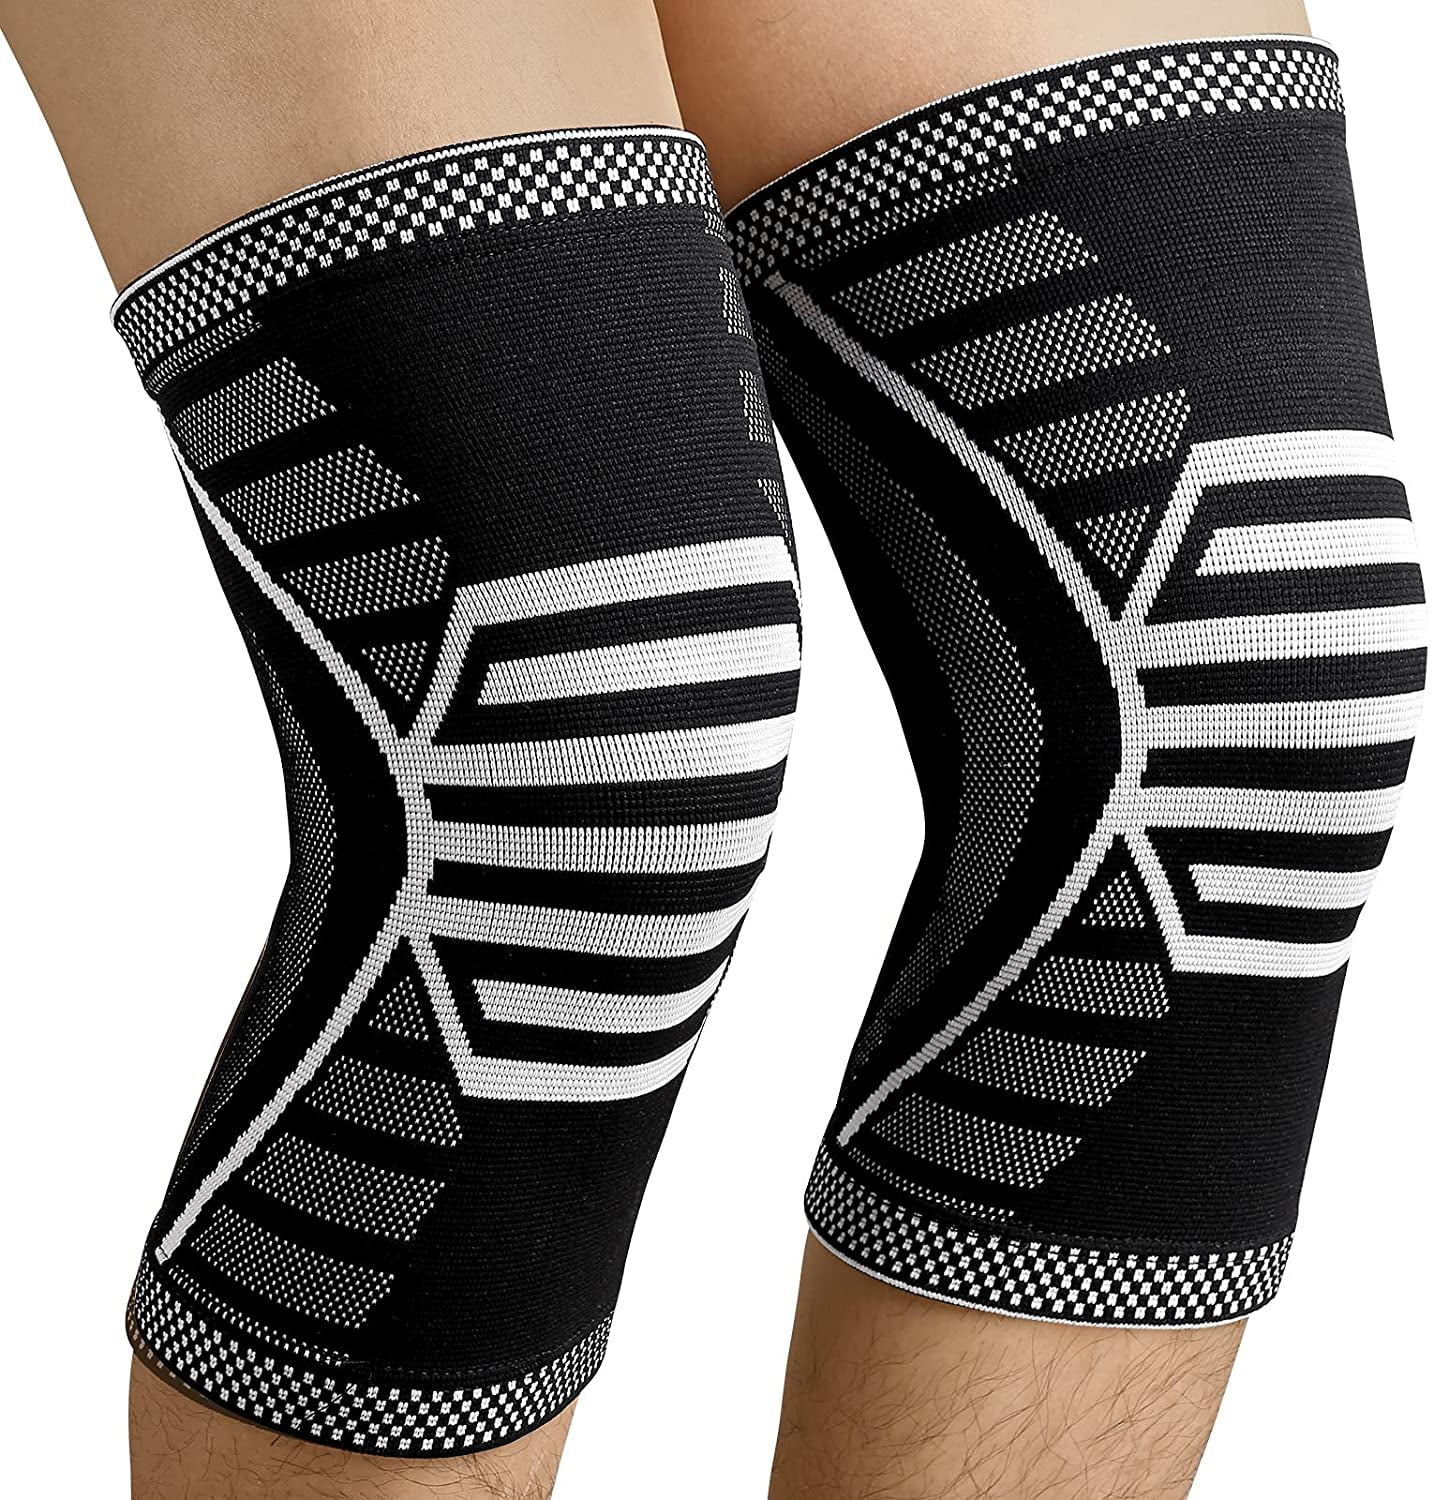 Knit Knee Brace Compression Sleeve for Meniscus Tear Arthritis Joint Pain Relief 